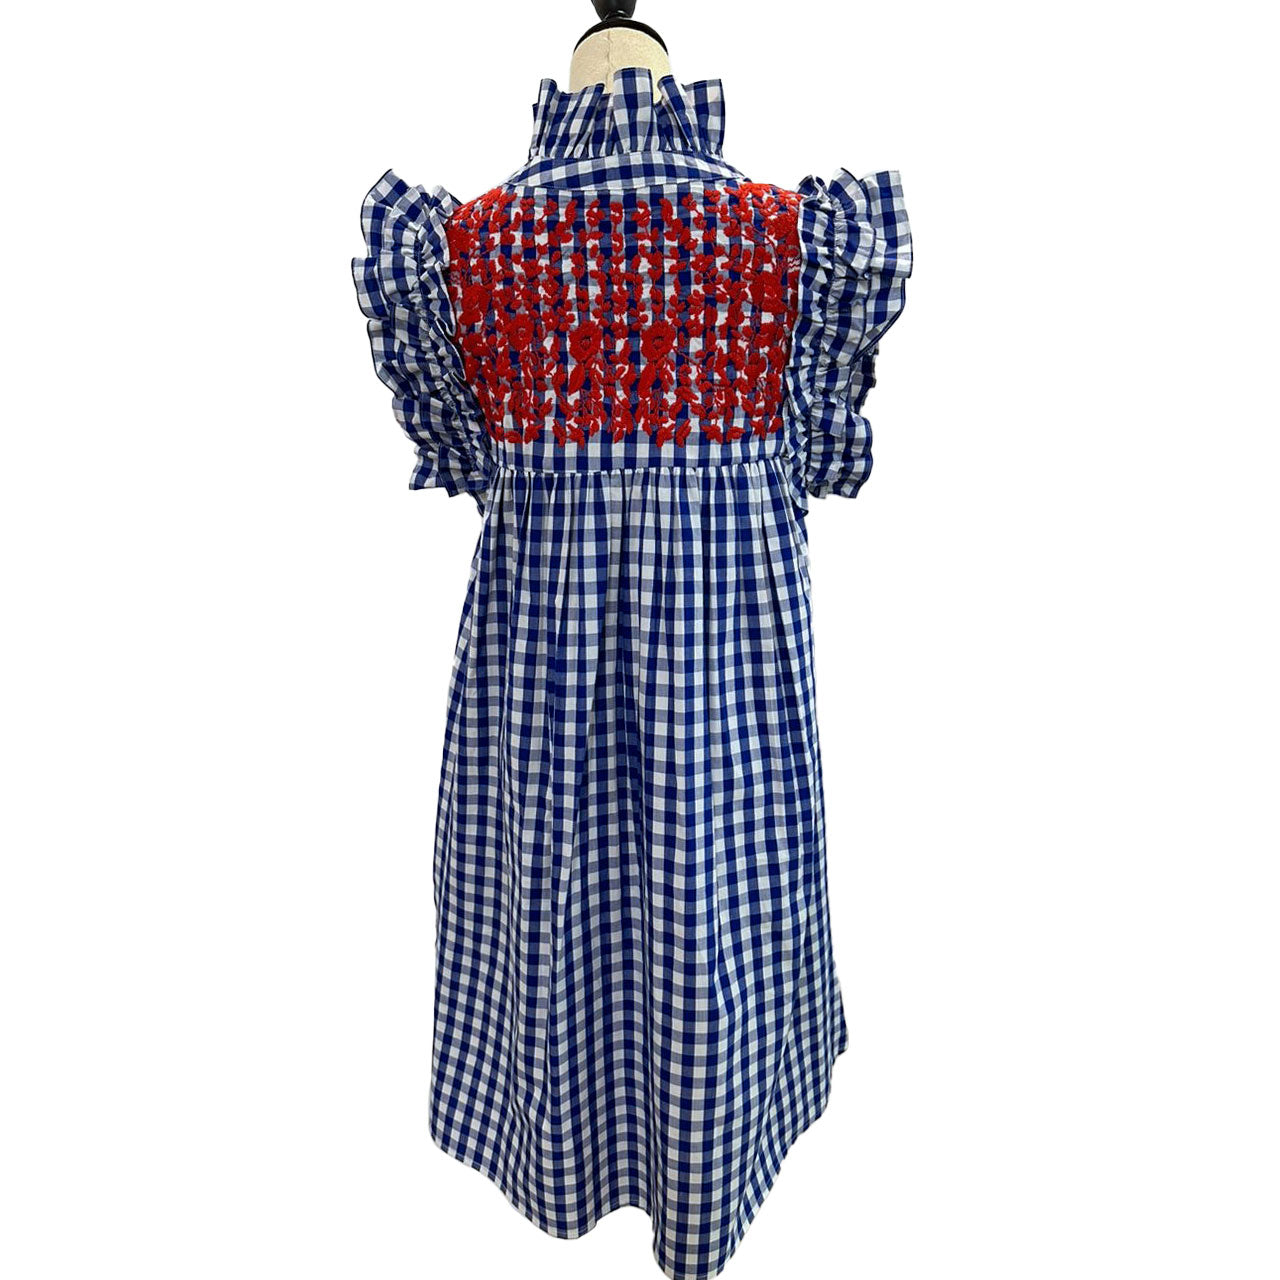 PRE-ORDER: Fourth of July Buffalo Check Hummingbird Dress with Pockets (mid-June delivery)